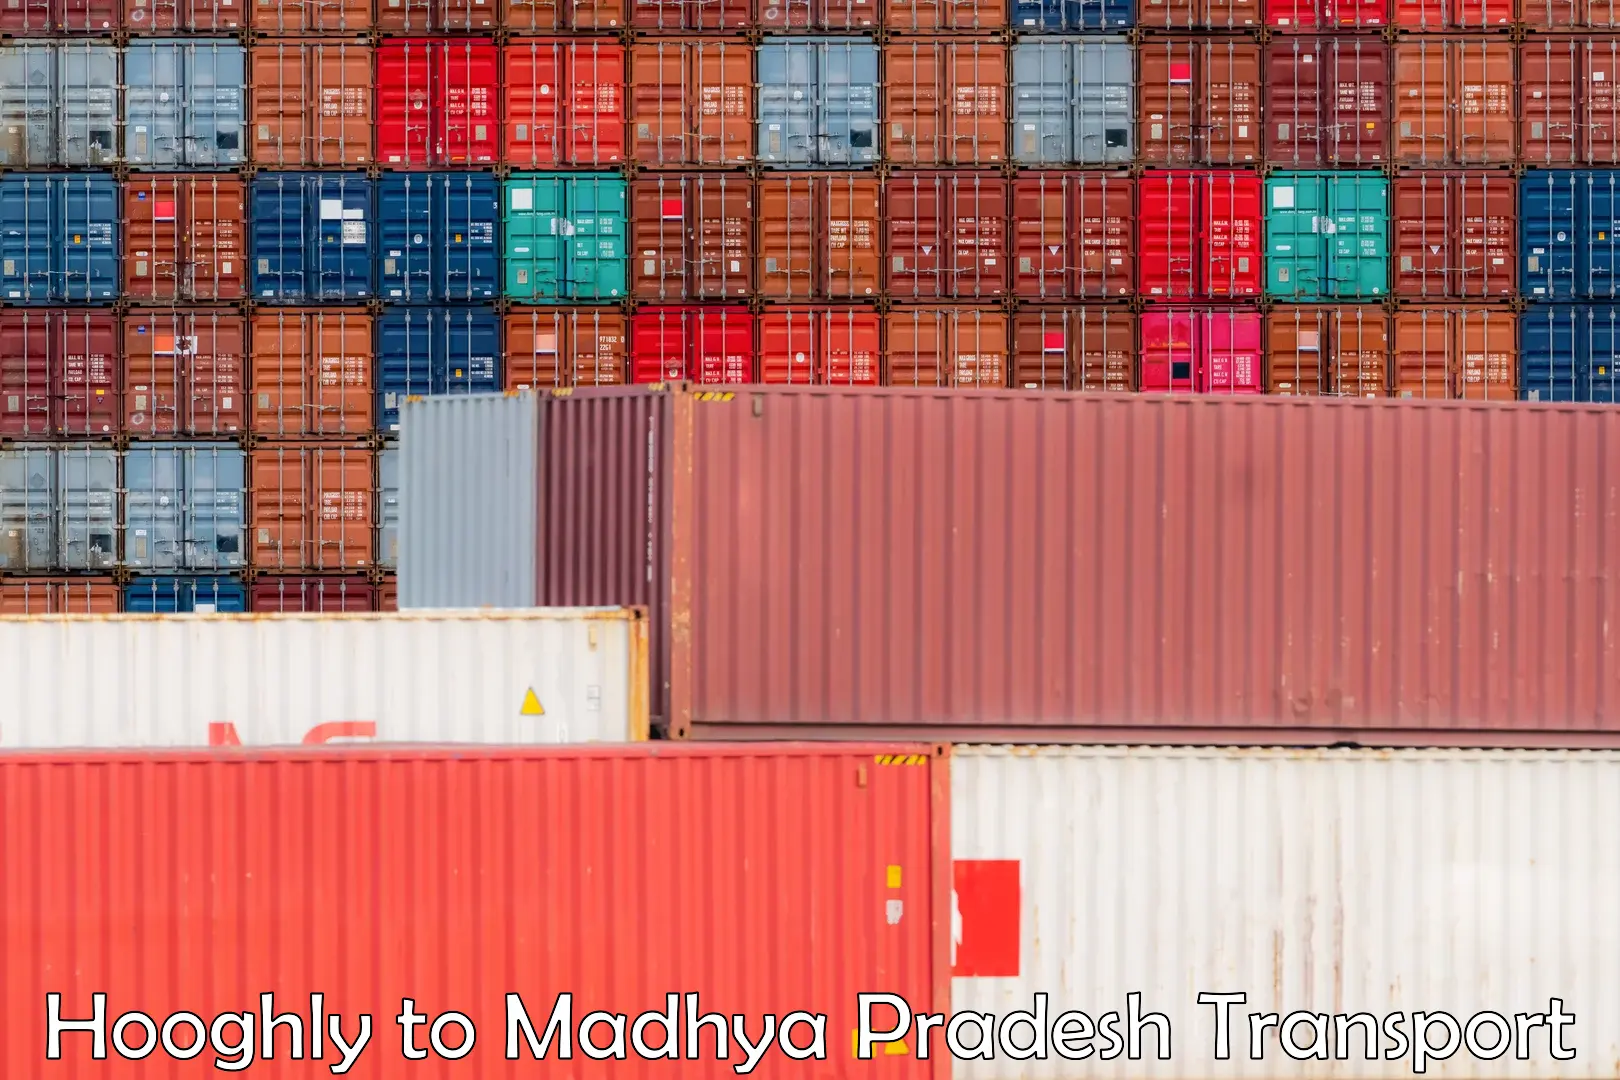 Cargo train transport services Hooghly to Madwas